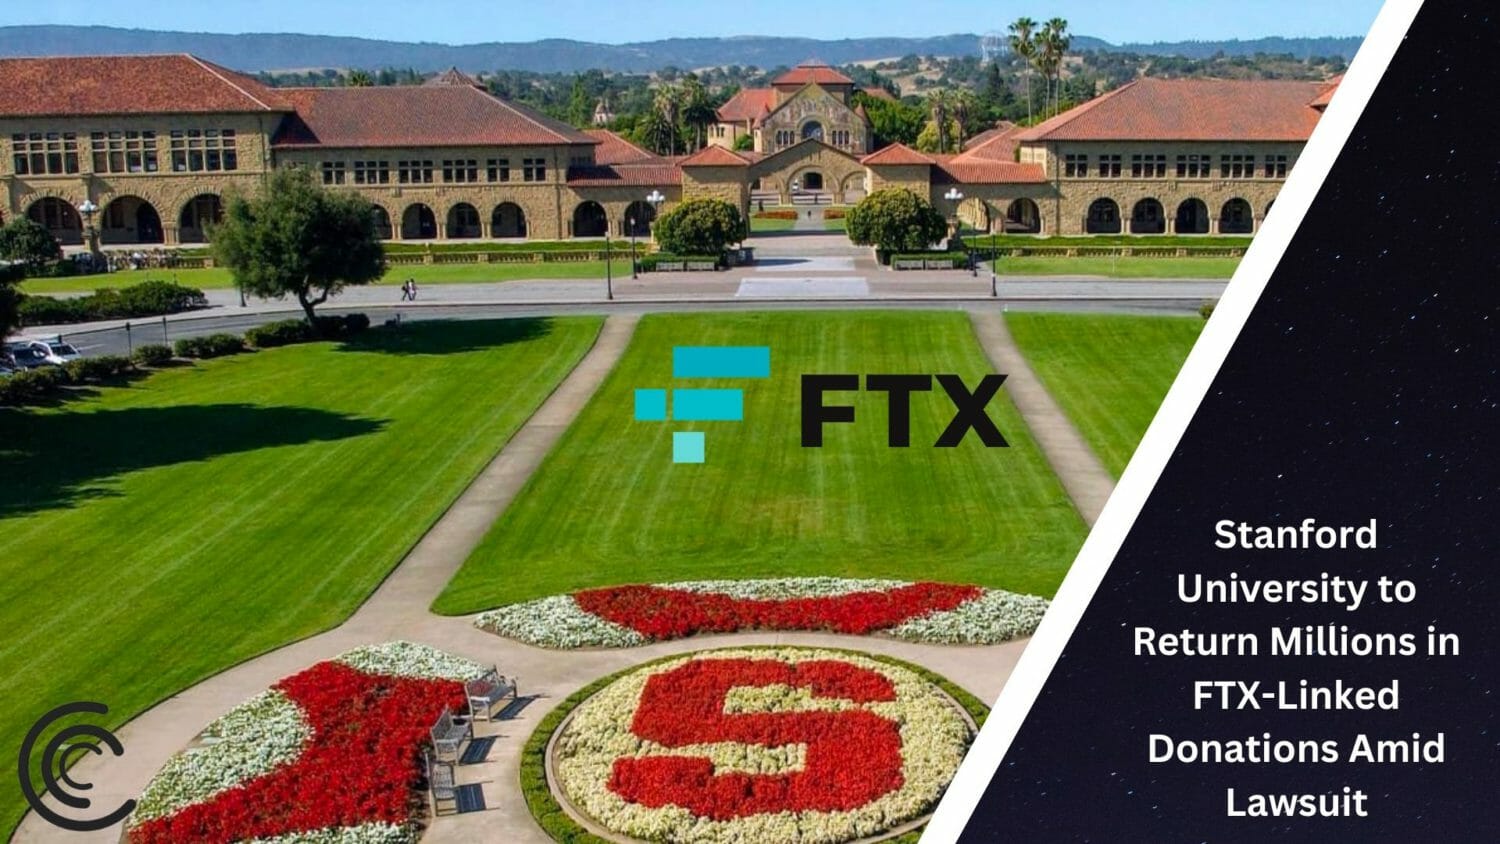 Stanford University To Return Millions In Ftx-Linked Donations Amid Lawsuit